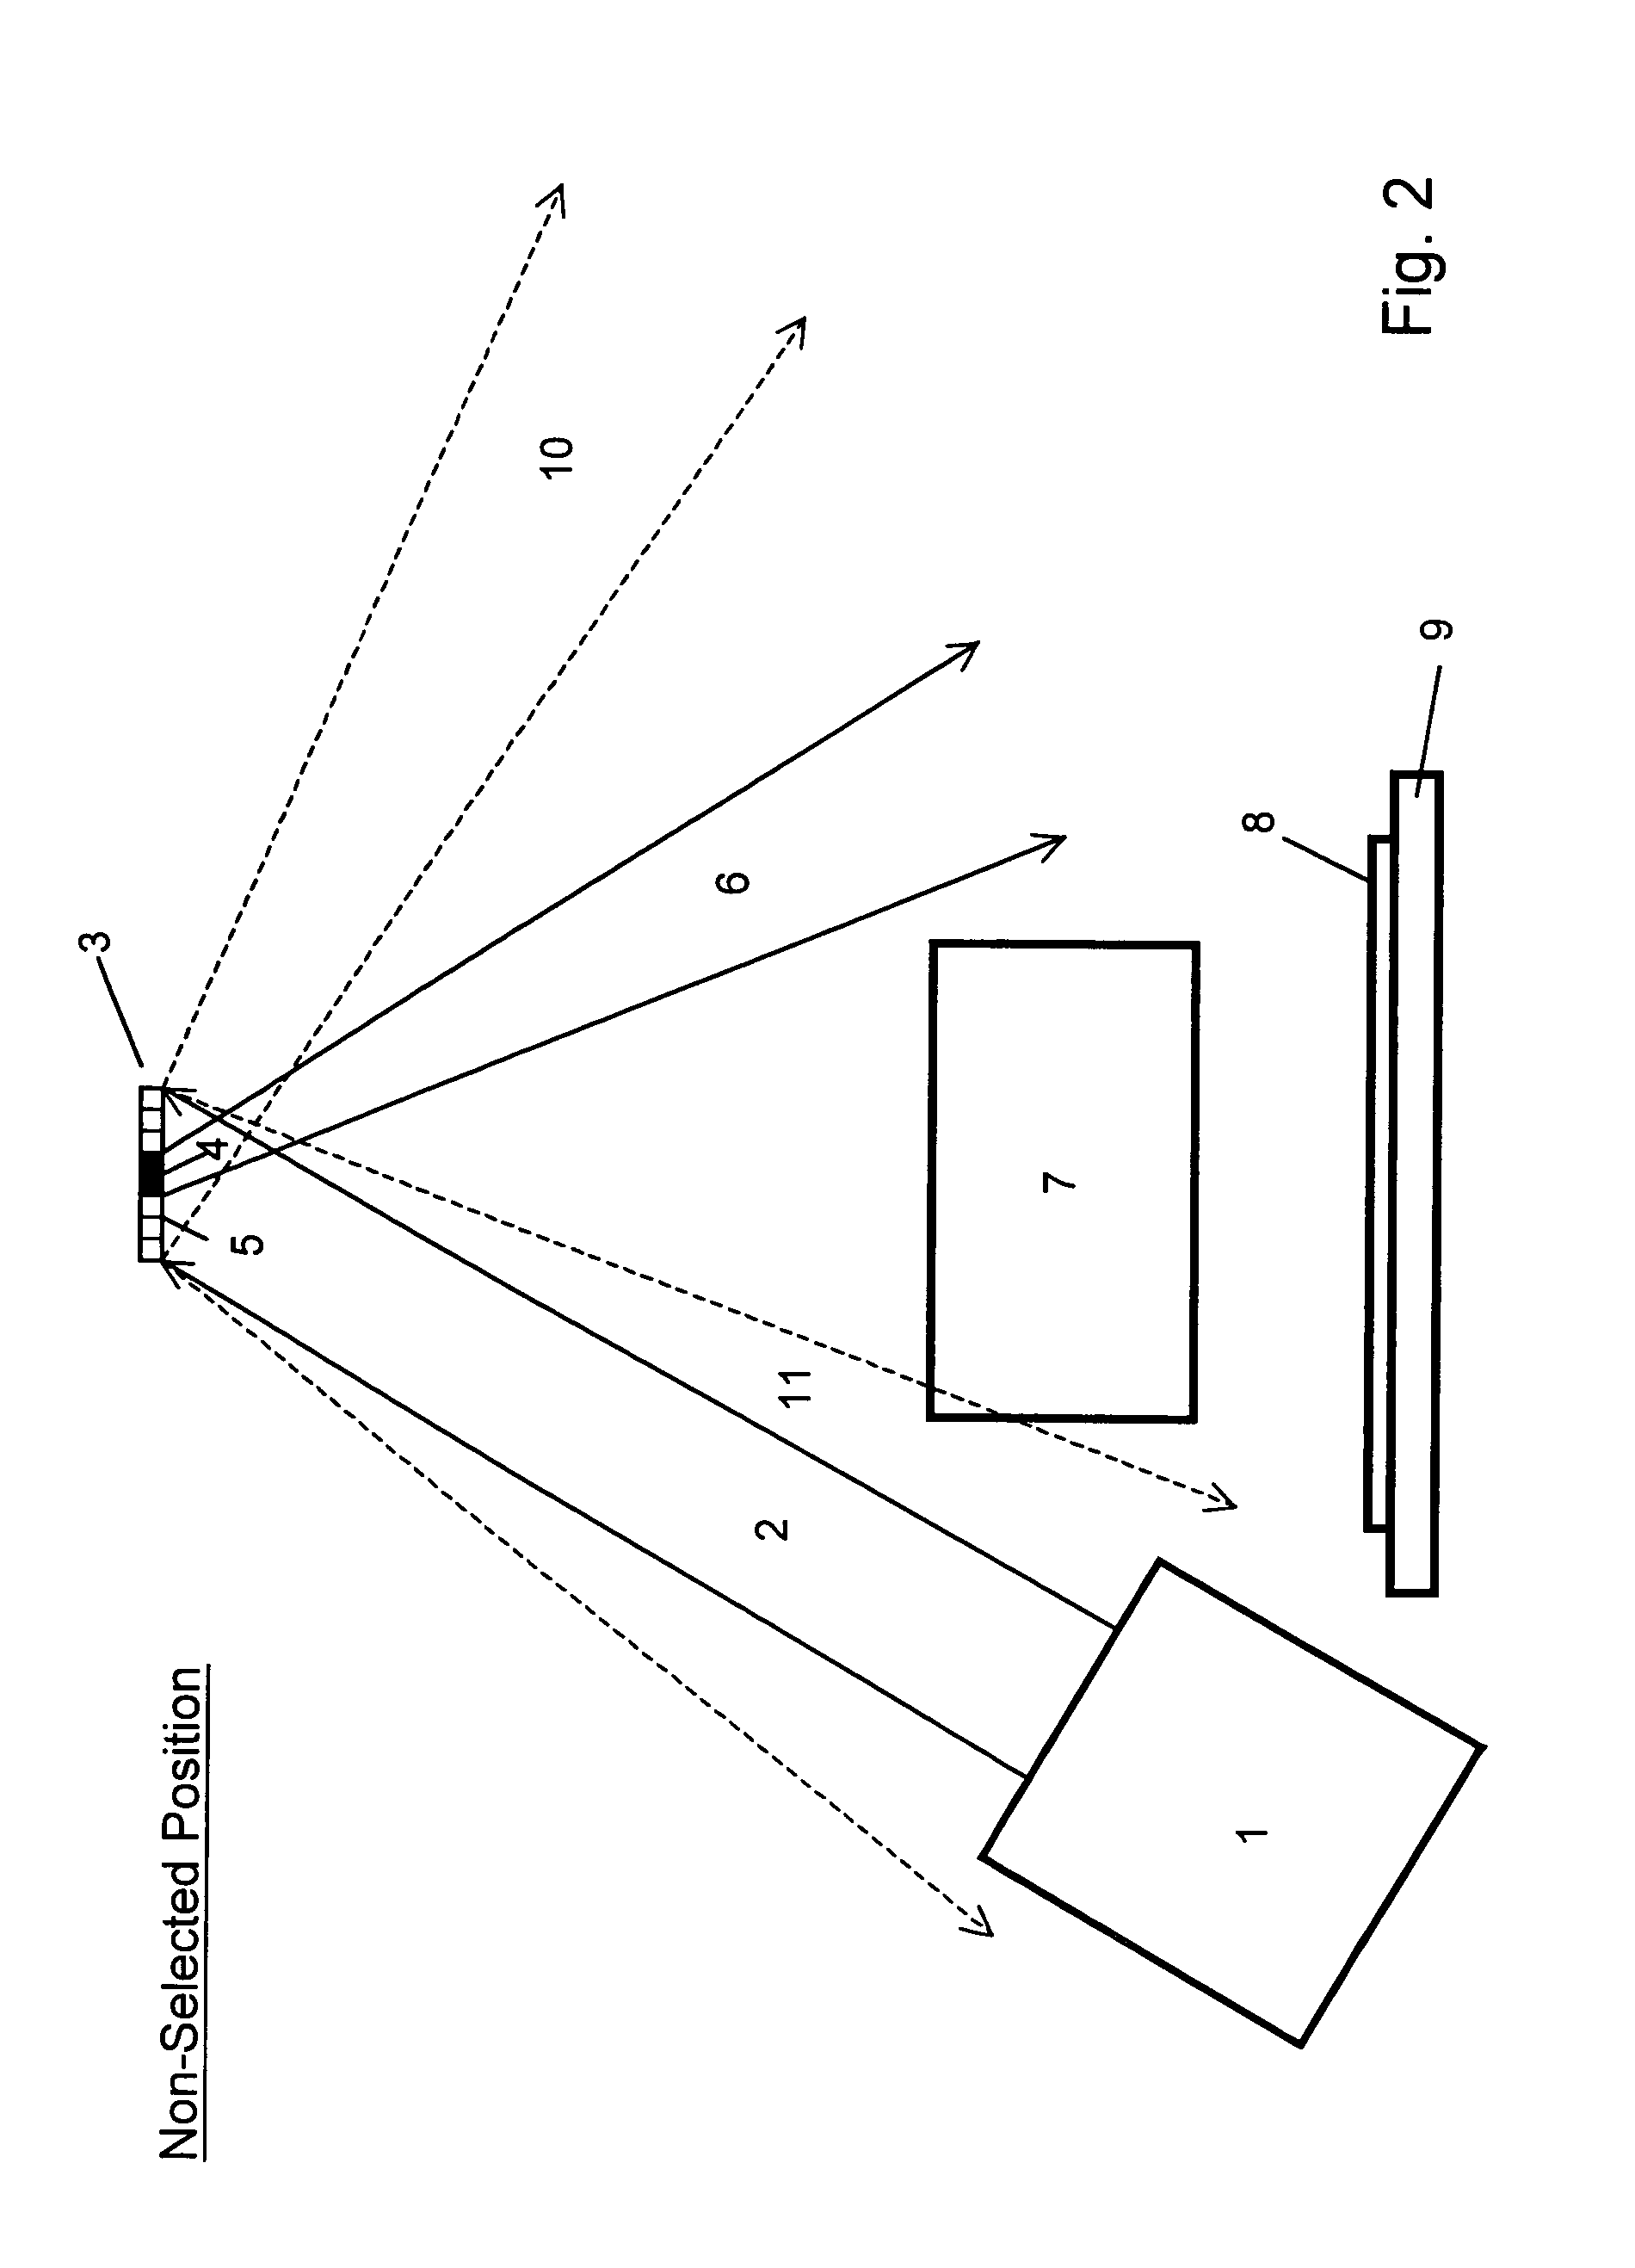 Spatial light modulator array with heat minimization and image enhancement features